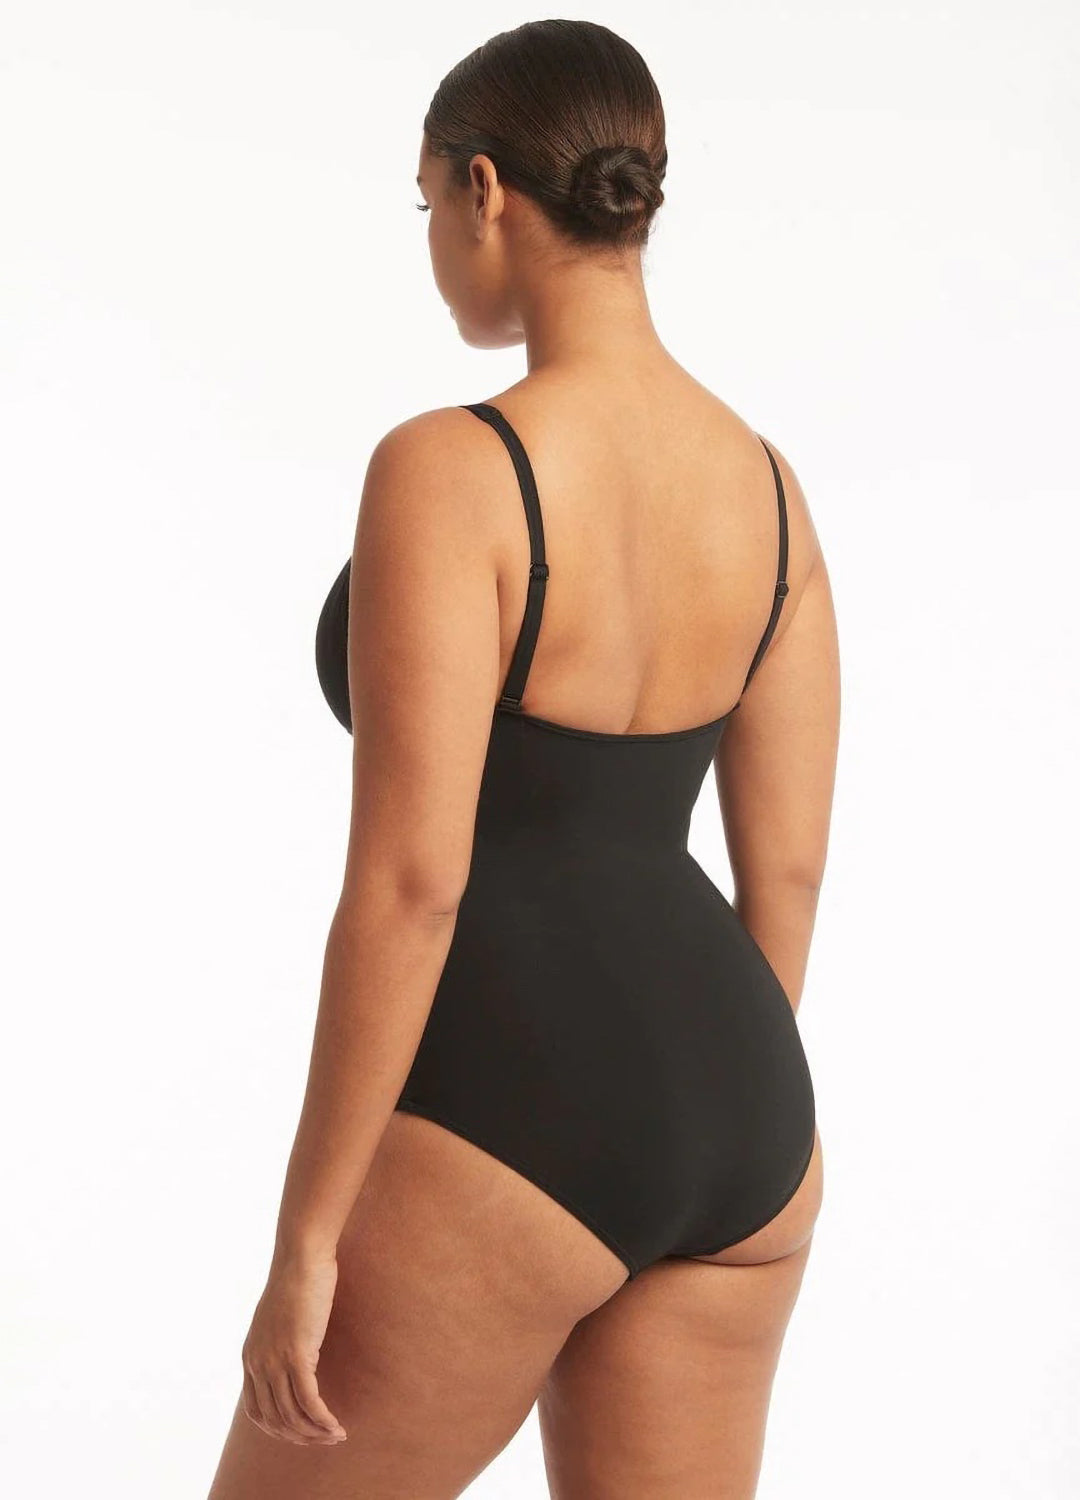 Sea Level Honeycomb Cross Front Multifit Top Black - Available